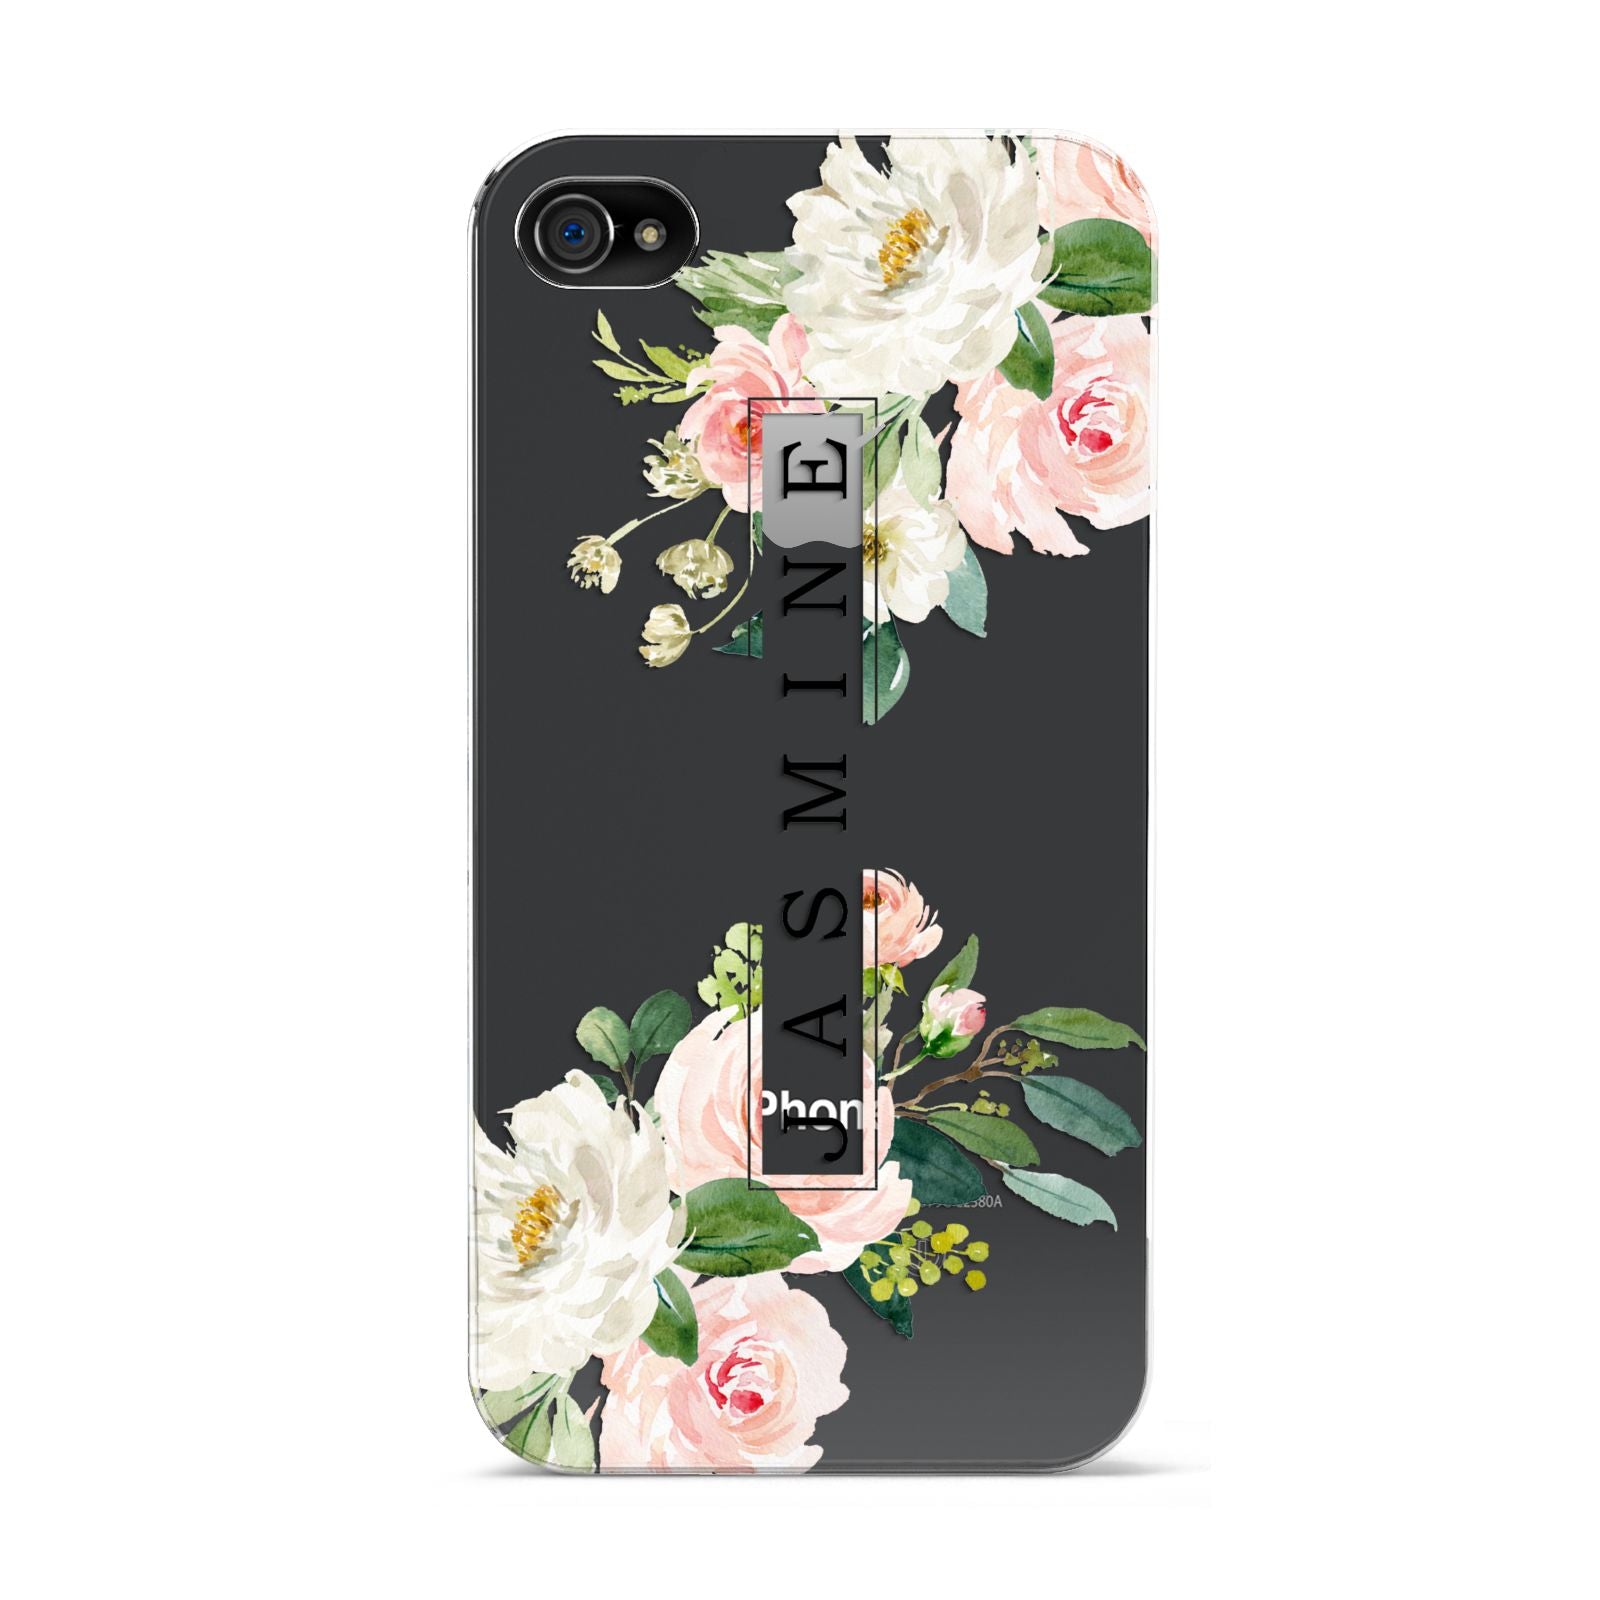 Personalised Floral Wreath with Name Apple iPhone 4s Case